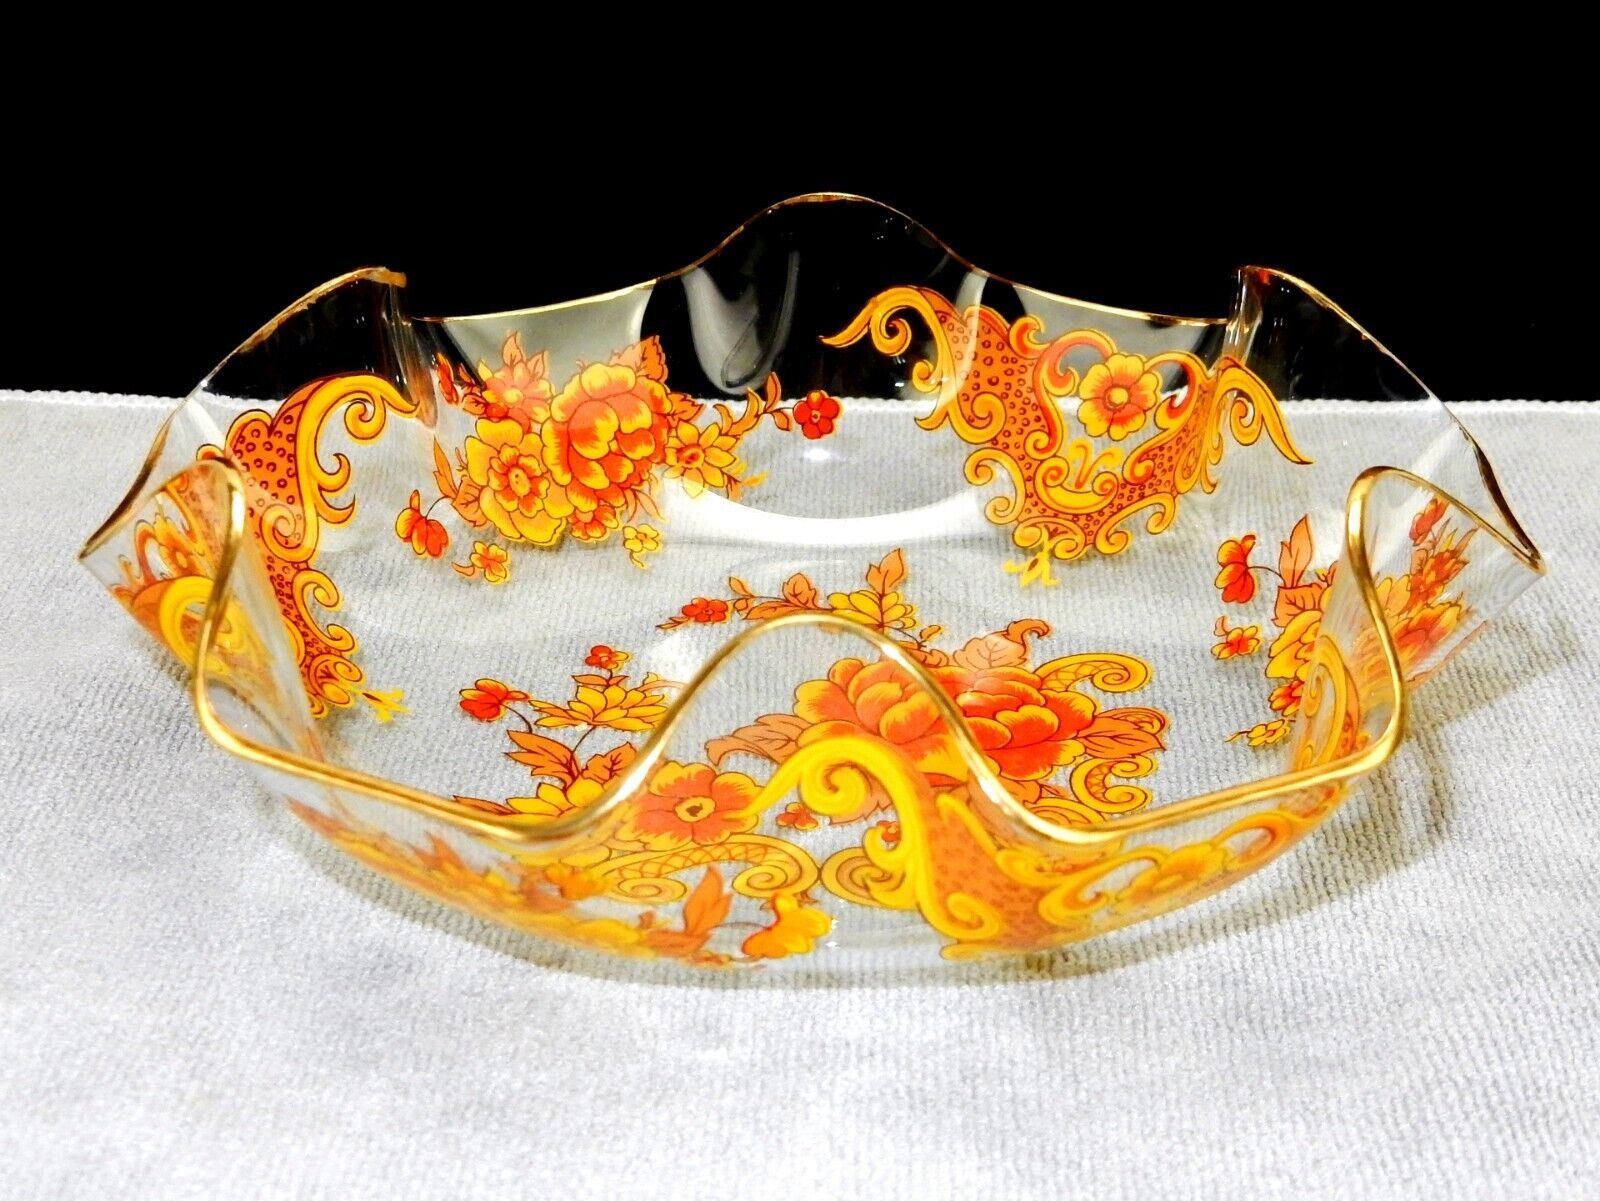 Primary image for Clear Glass Candy Dish, Wide Ruffled Rim w/Gold Trim, Orange Floral & Scrolls